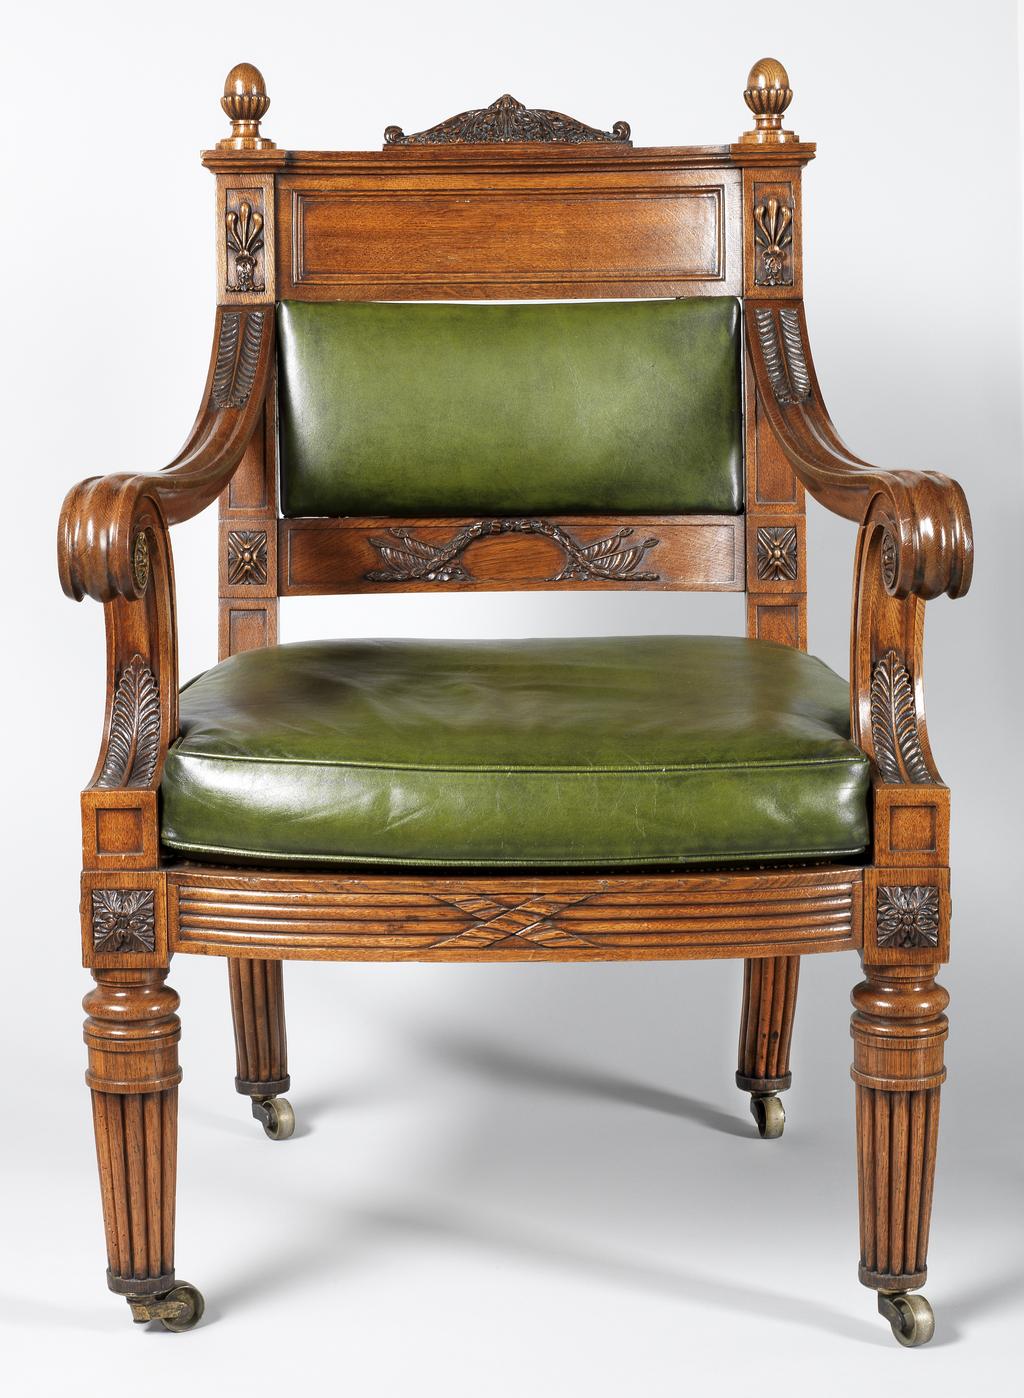 An image of Furniture. Chippendale, Thomas II, attributed to (British, 1749-1822). Armchair of carved oak with turned legs and caned seat, with modern green leather squab seat cushion and back panel and brass casters. Replacement back and cushions, Old woodworm holes. Oak frame, cane seat, leather back panel, cushion (replacement), brass (alloy) castors, height, 107.5 cm, width, front, 68 cm, width, back, 57 cm, depth, 64.2 cm, circa 1820 to circa 1821. Regency Period. Production Note: The design is related to three chairs carved from the famous 'Waterloo Elm'. Two were commissioned from Thomas Chippendale by John George Children (1777-1852). The first was given to George IV in 1821 at Carlton House, and is now at Windsor Castle. The second was for Children's own use. It was given by him to the Duke of Wellington in 1837, and now at Apsley House, London. A third armchair was commissioned by the Duke of Rutland, and is at Belvoir Castle. The Fitzwilliam's chair is close in design to the chair at Apsley House.